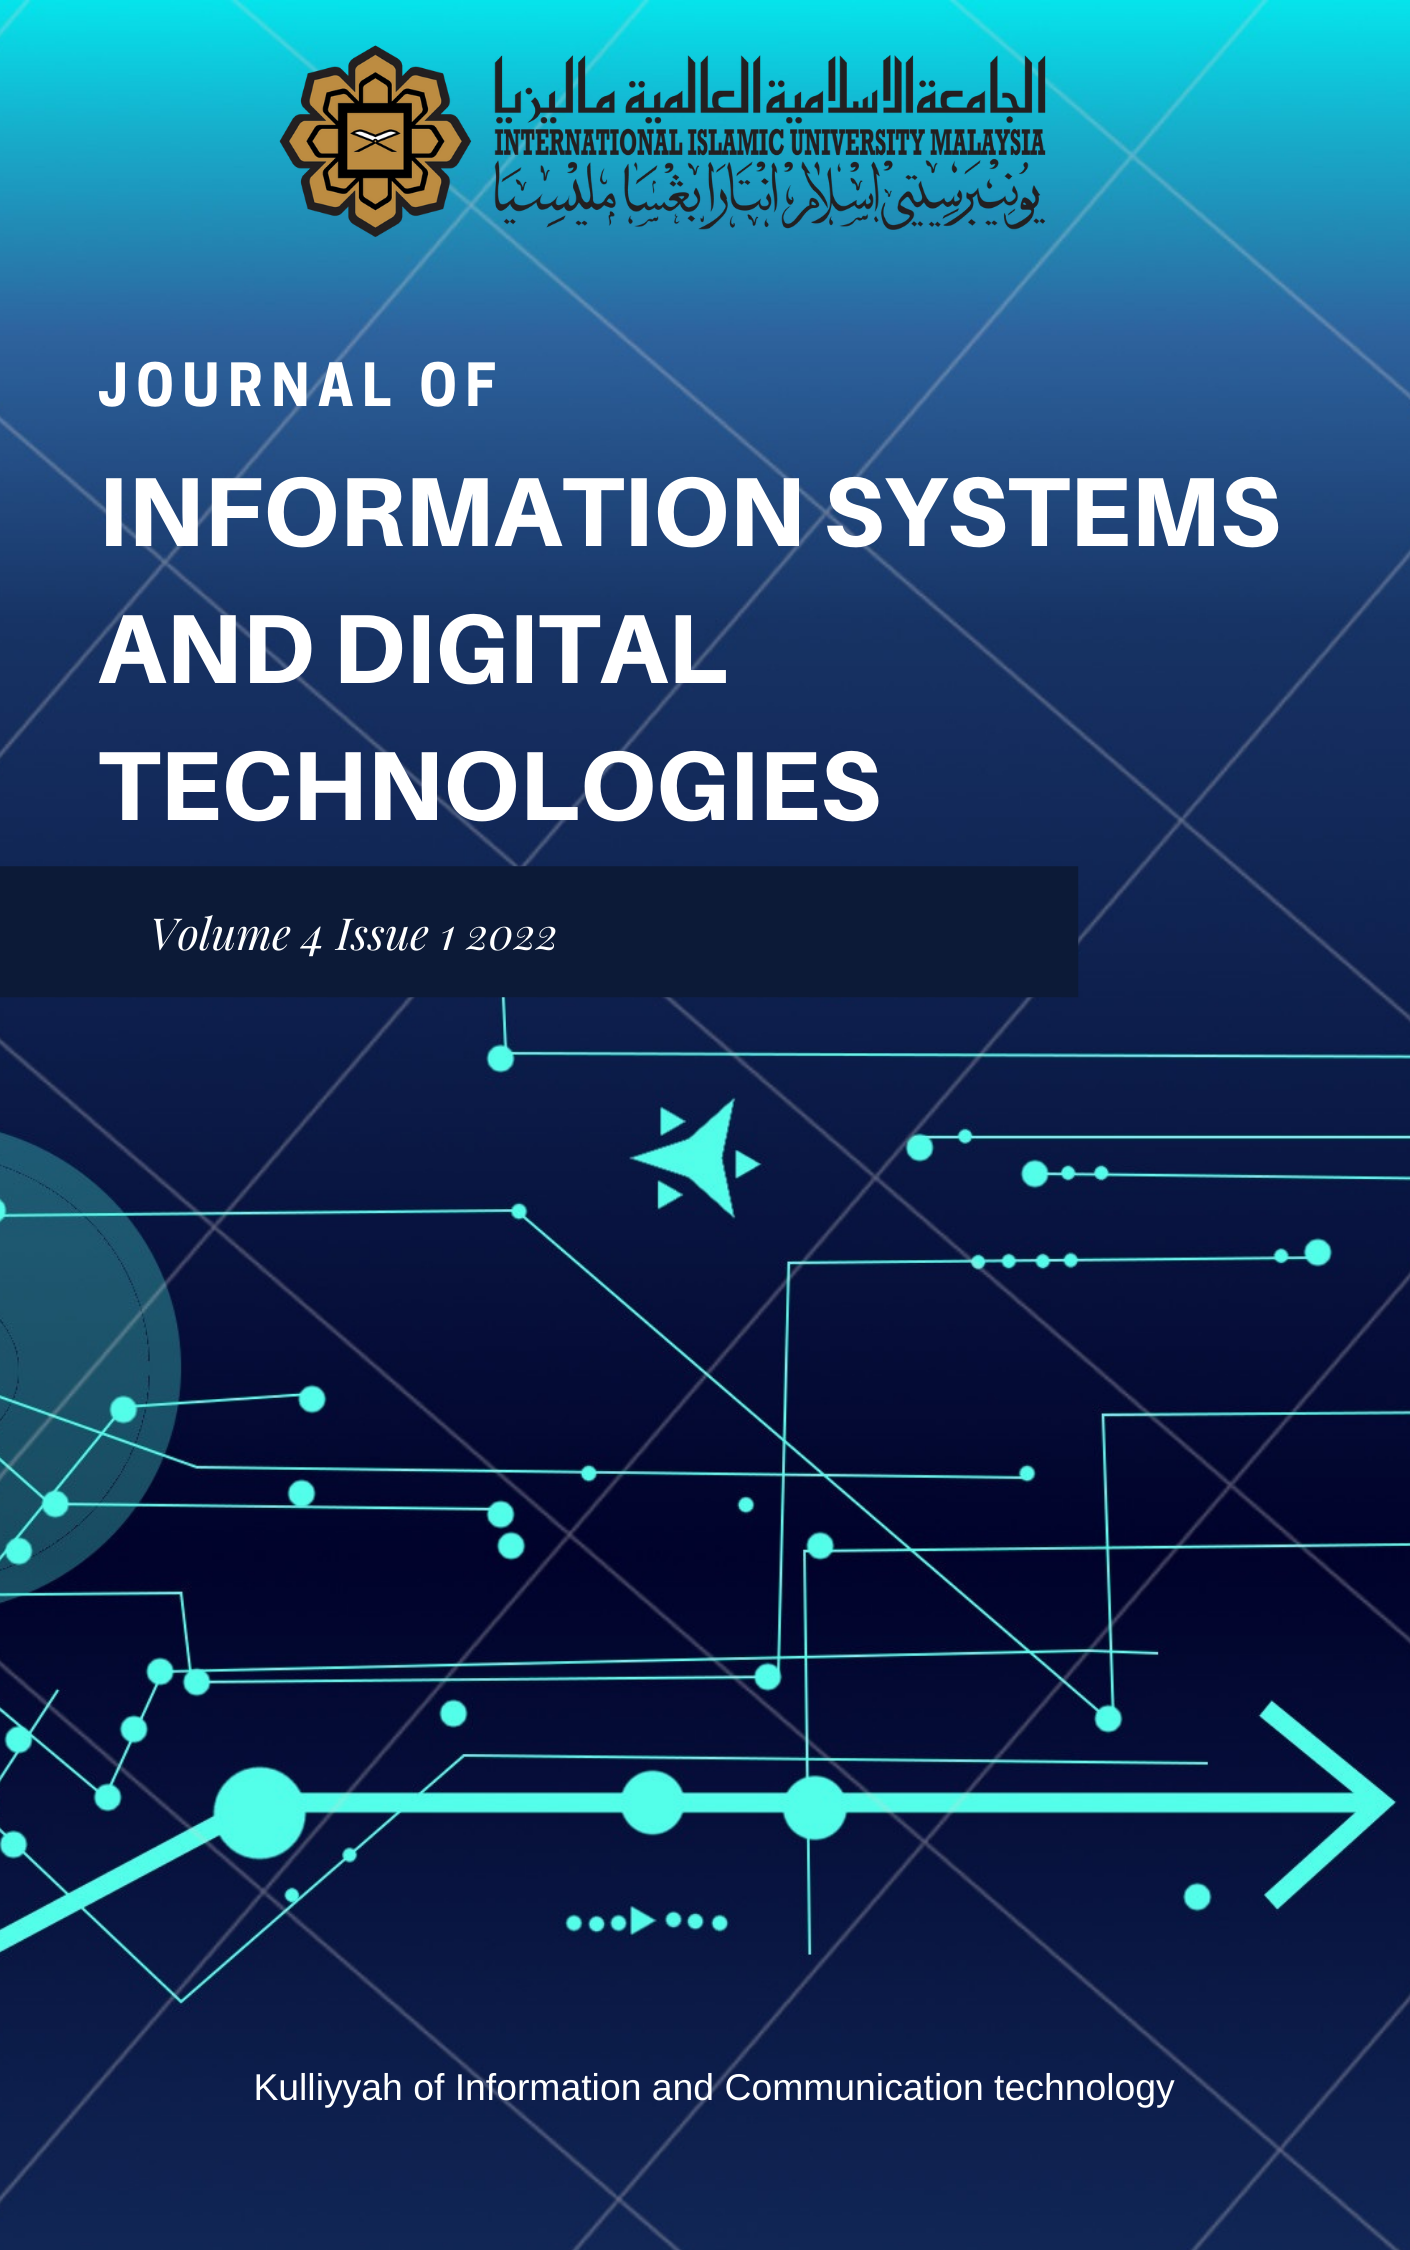 					View Vol. 4 No. 1 (2022): Journal of Information Systems and Digital Technologies
				